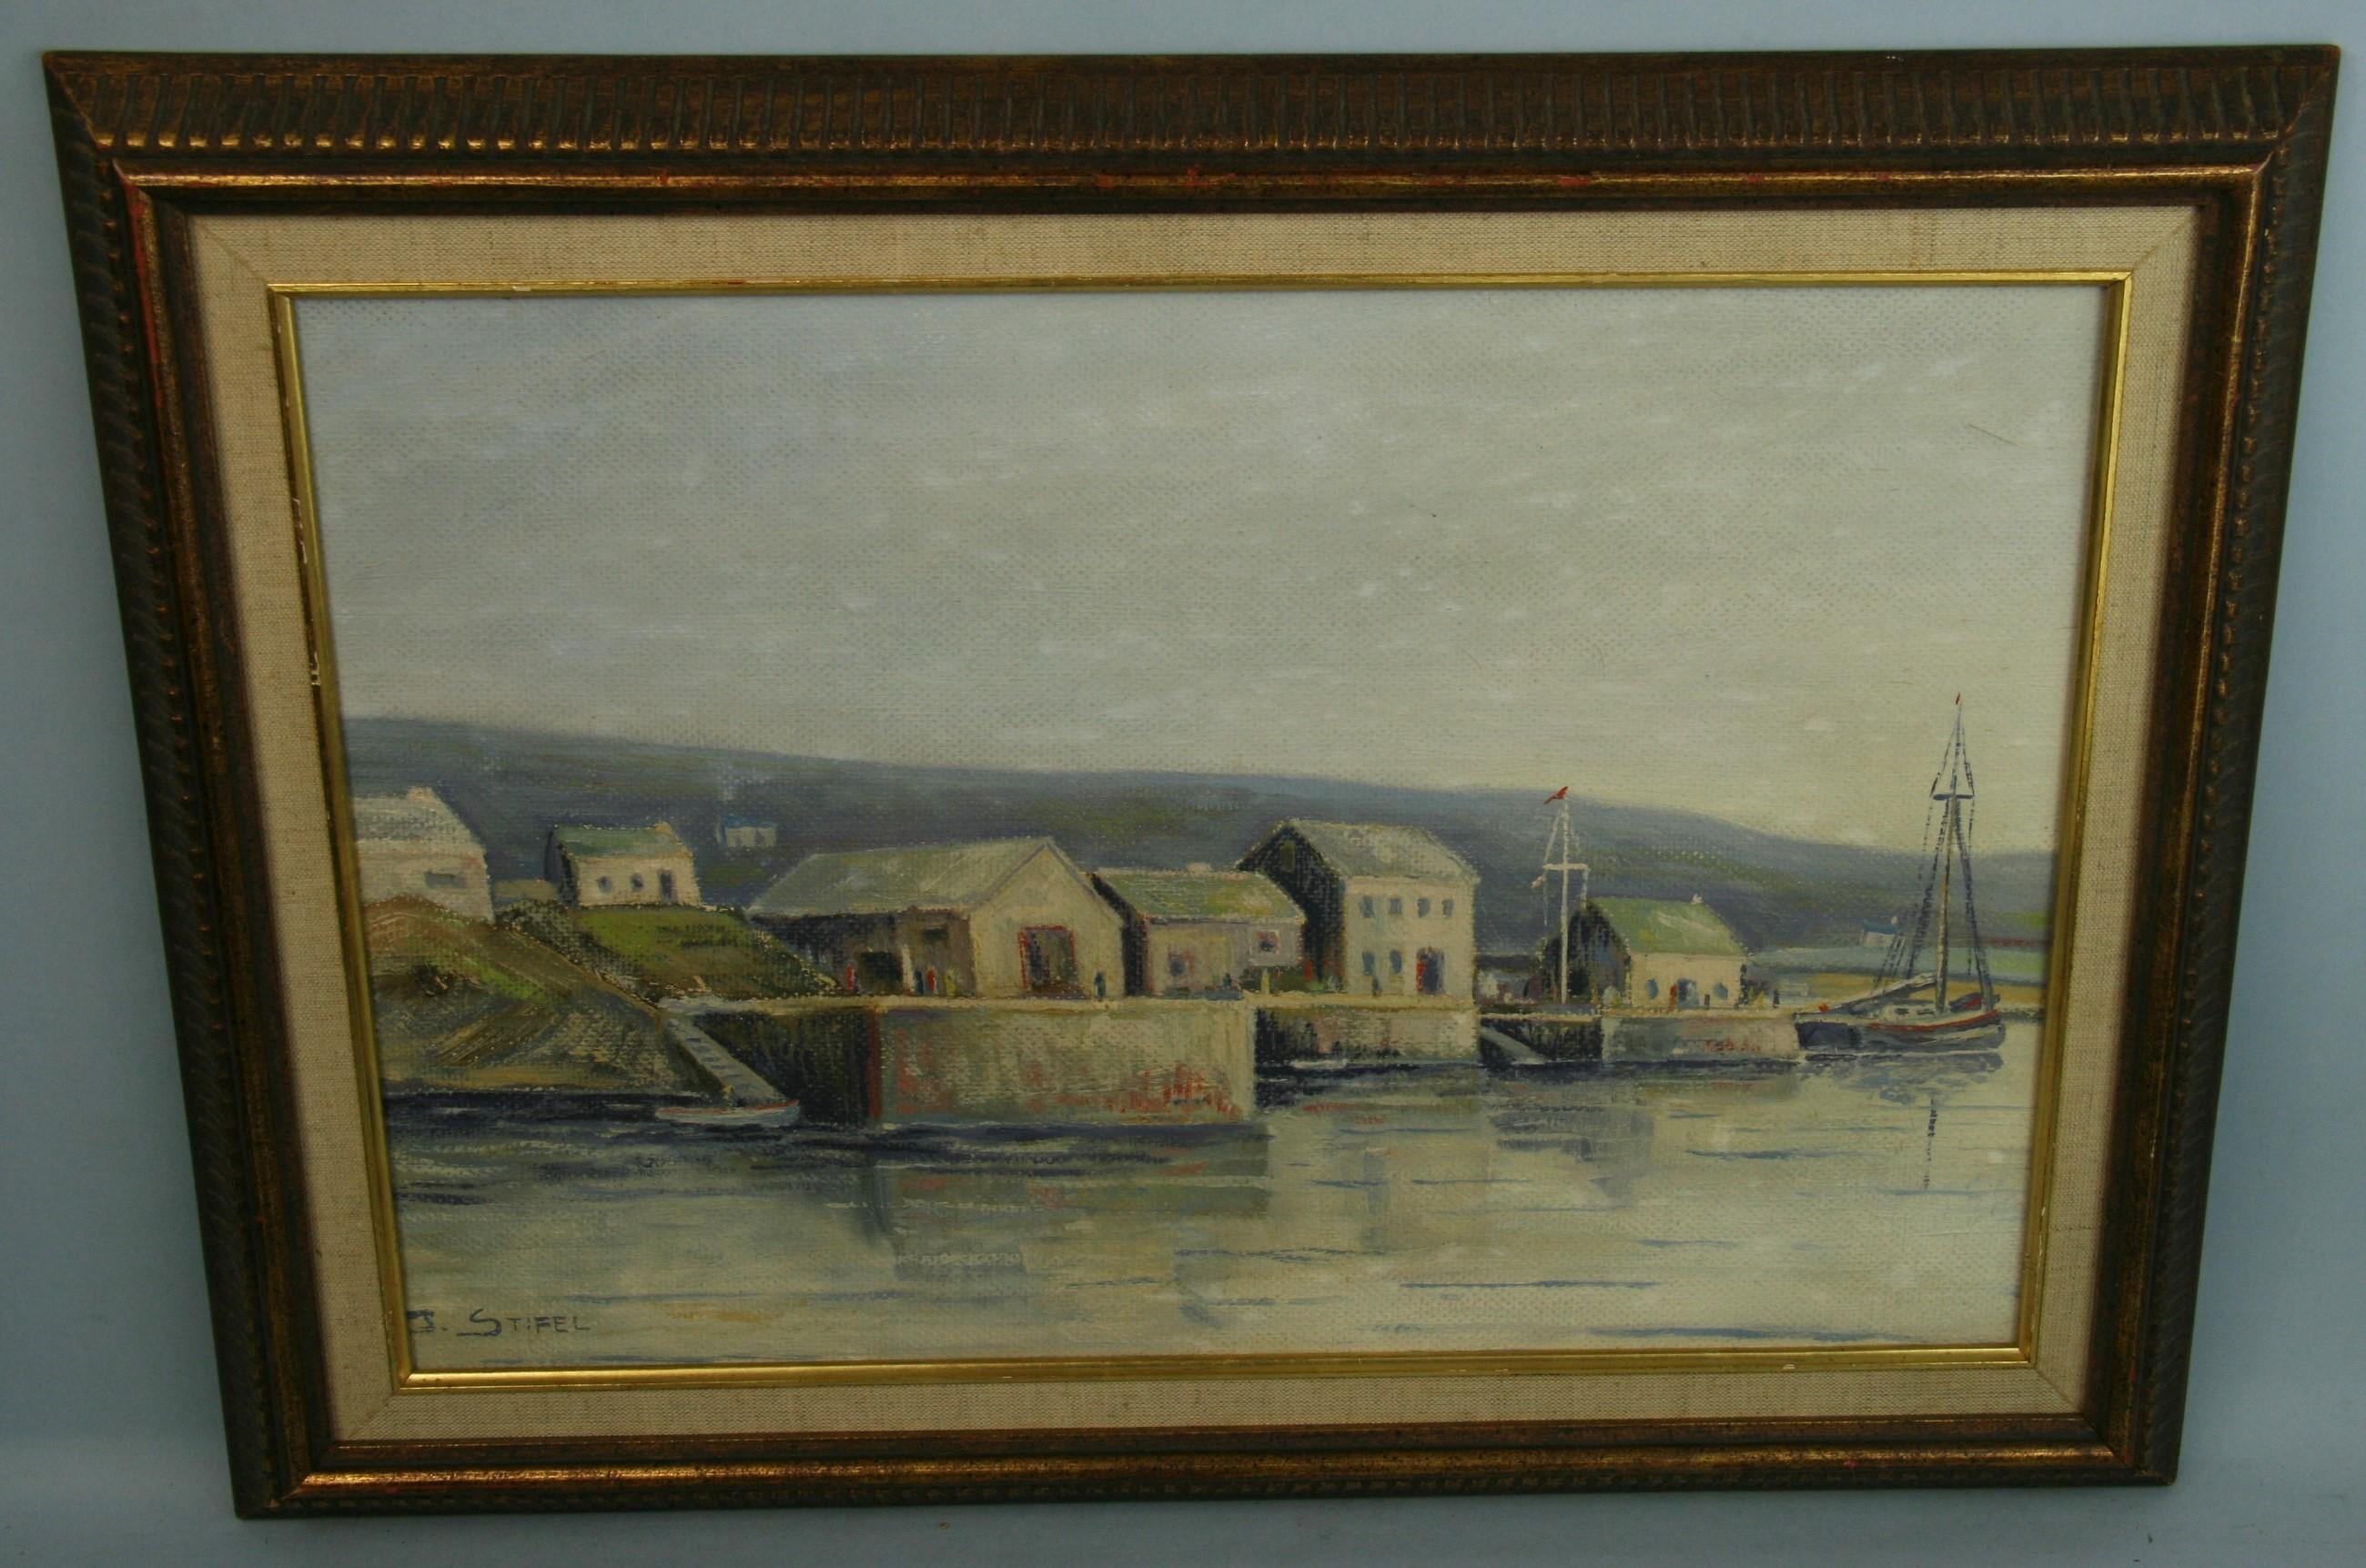 Antique American Pacific Coast  Village Landscape by M. Stiefel 1940 - Painting by M.Stiefel